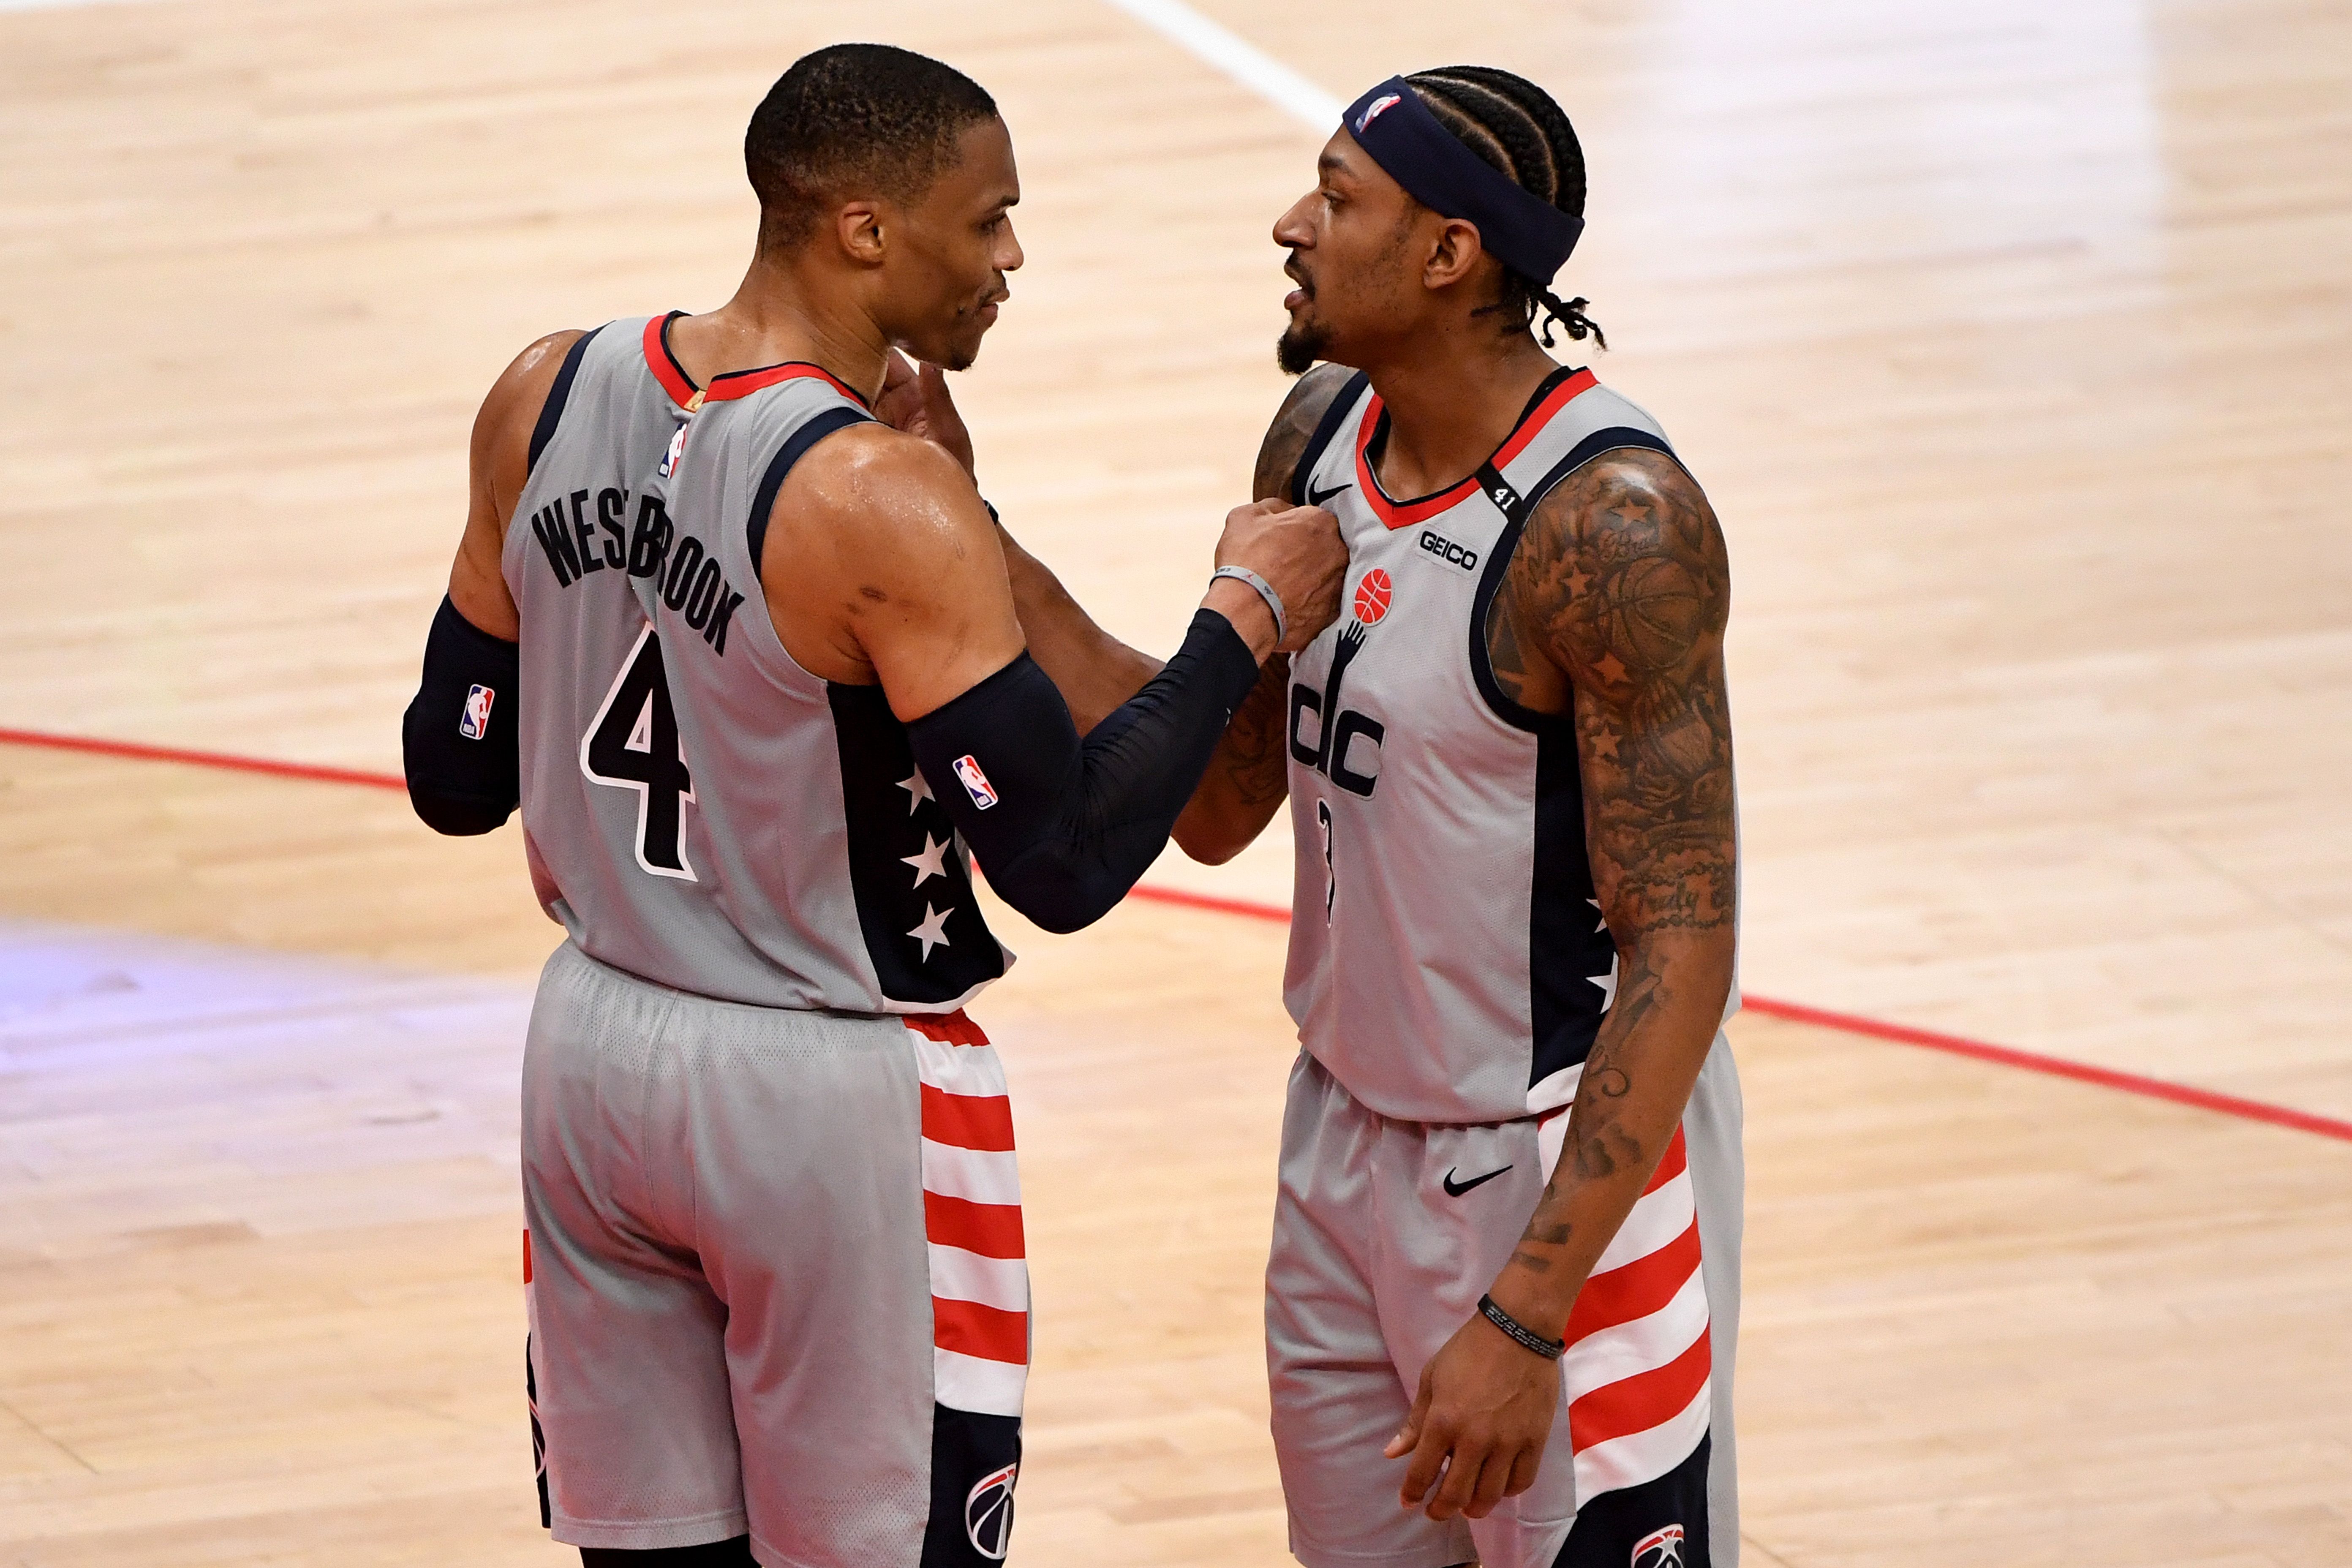 Russell Westbrook and Bradley Beal praising each other after the game